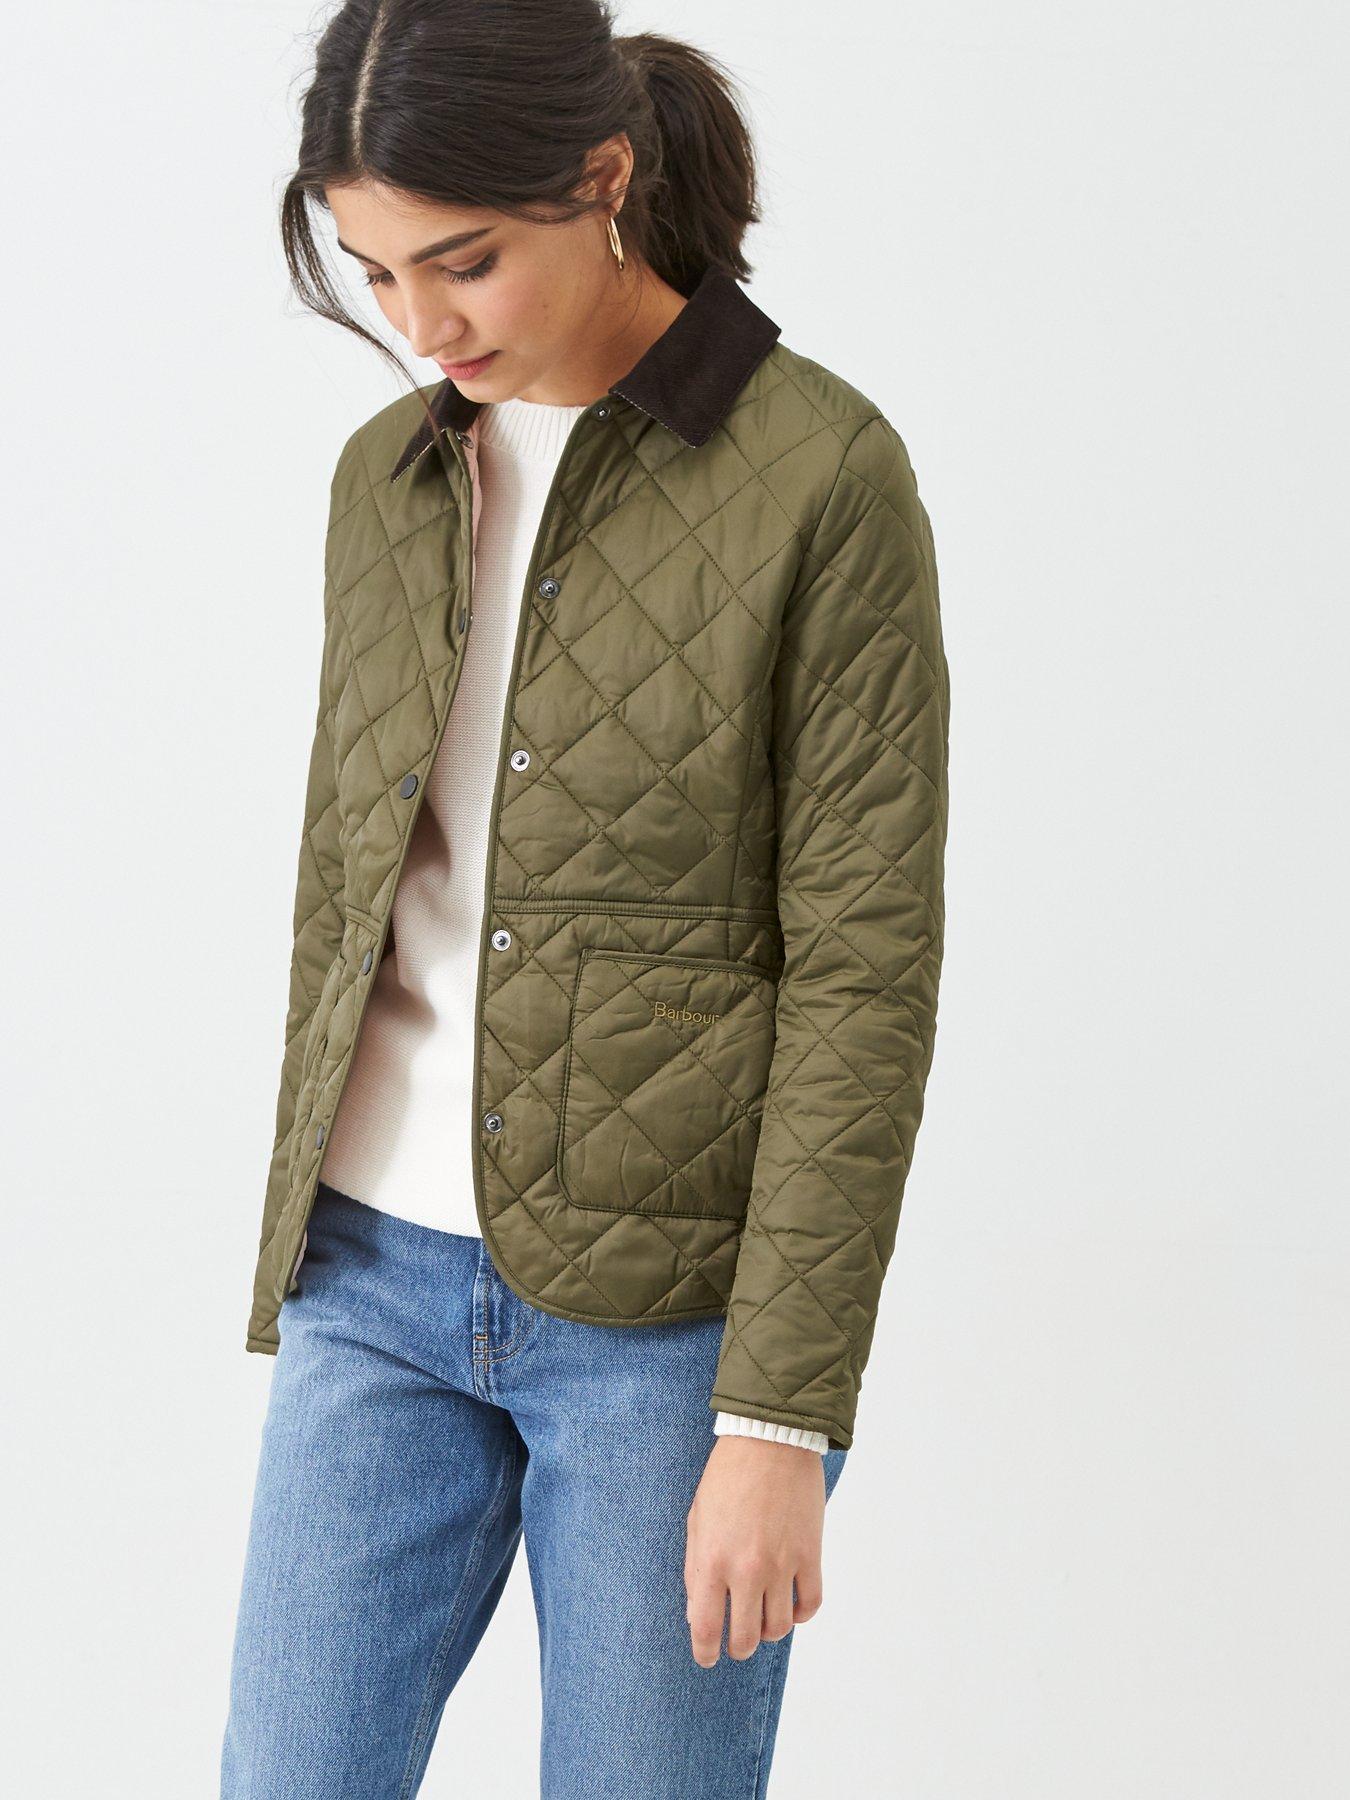 barbour quilted jackets uk